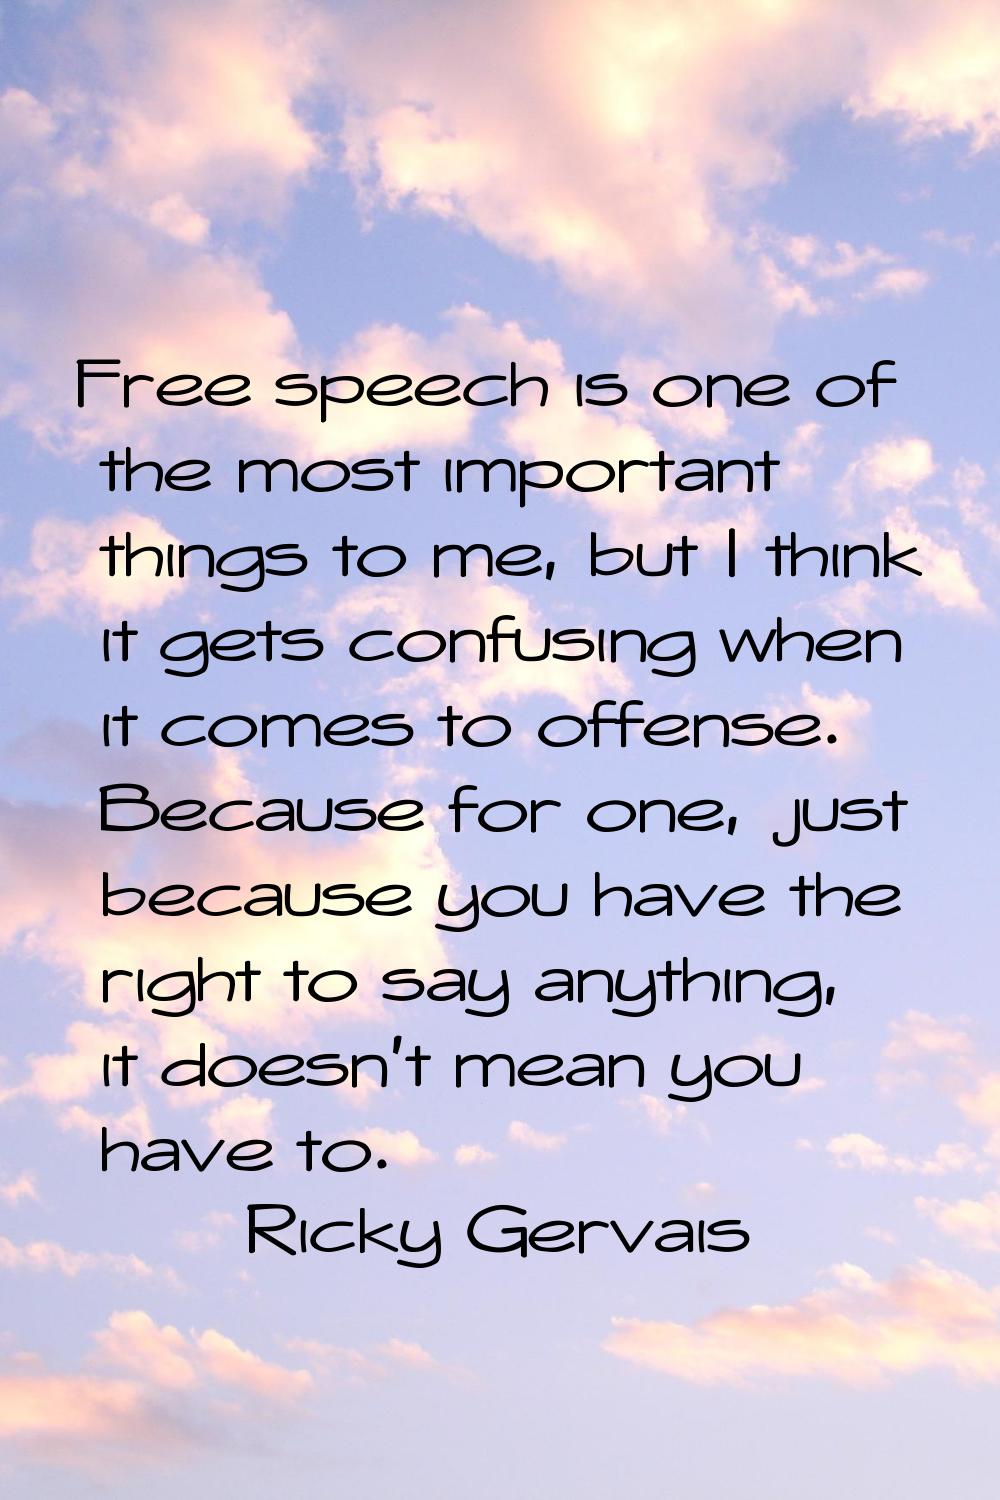 Free speech is one of the most important things to me, but I think it gets confusing when it comes 